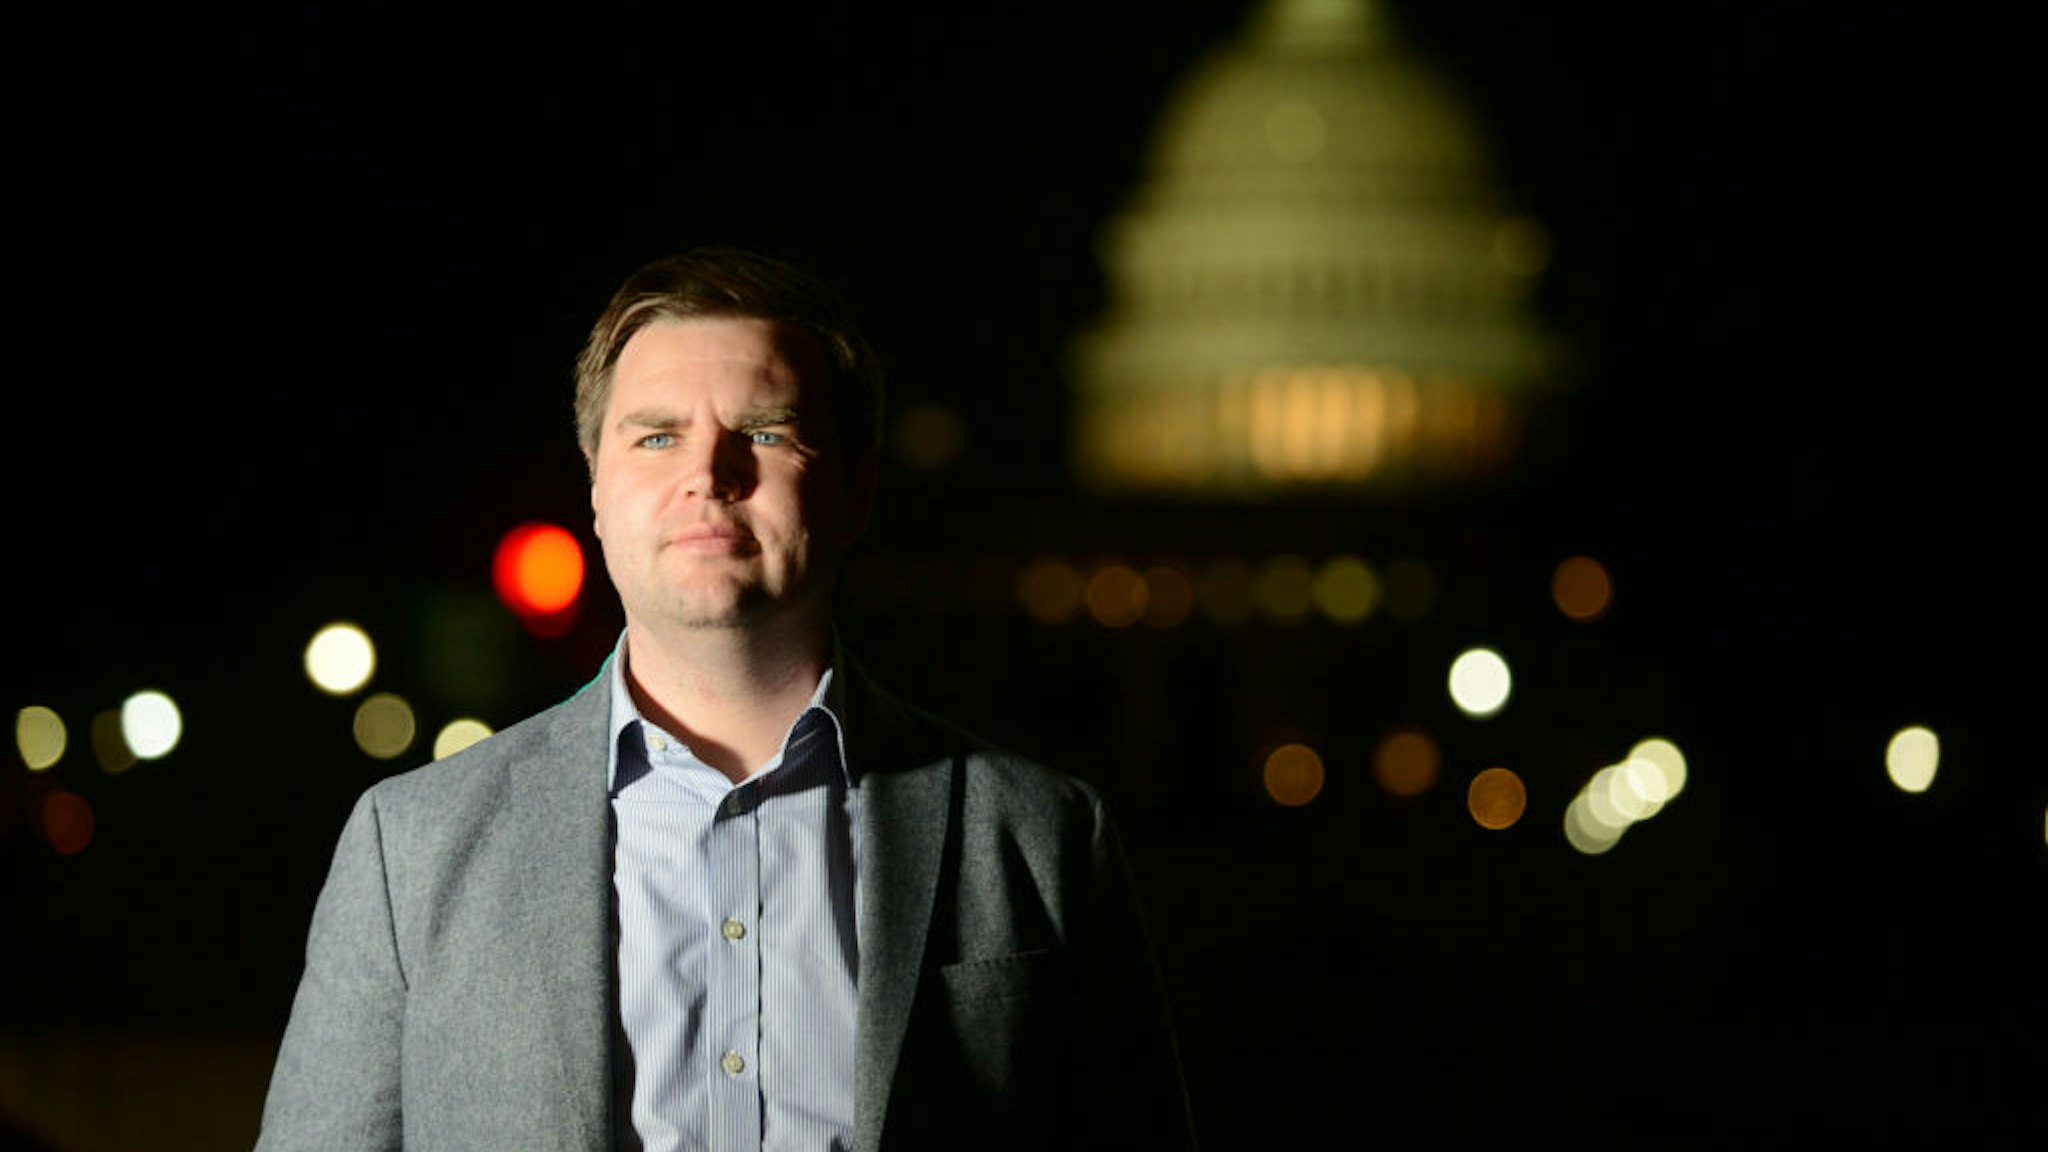 J.D. Vance, author of the book "Hillbilly Elegy," poses for a portrait photograph near the US Capitol building in Washington, D.C., January 27, 2017